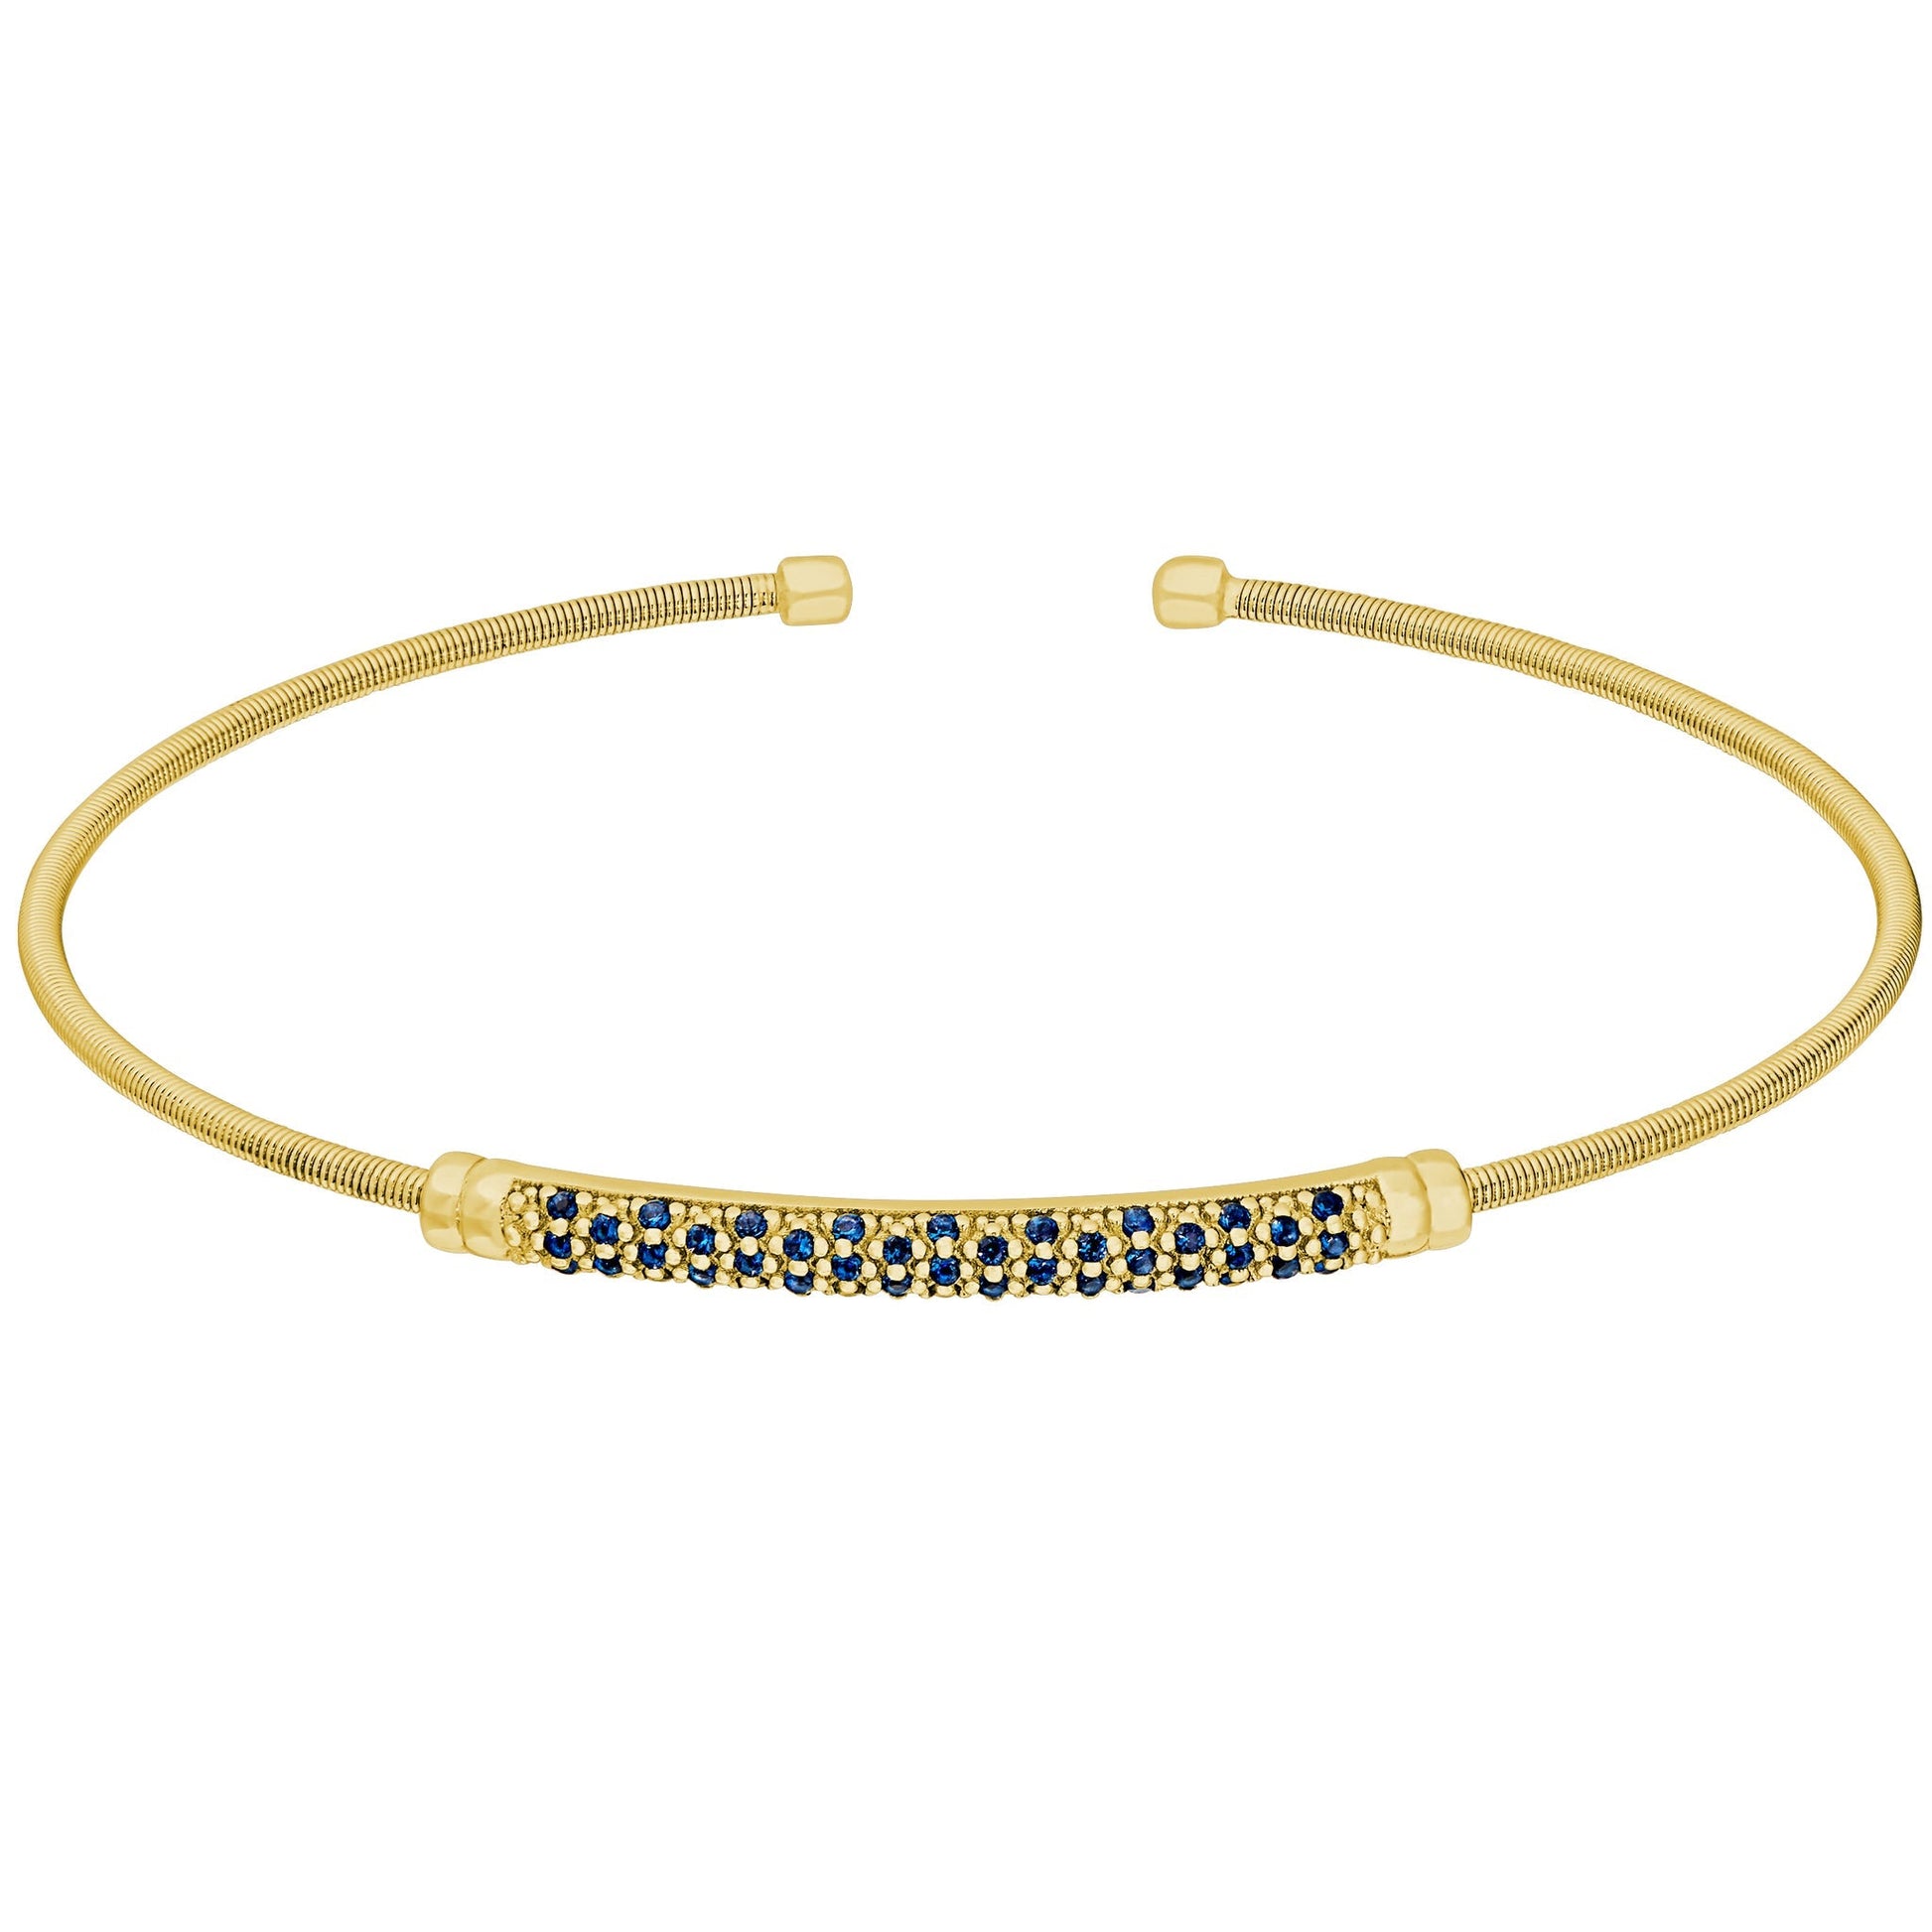 A birthstone flexible cable bracelet with simulated gemstones displayed on a neutral white background.